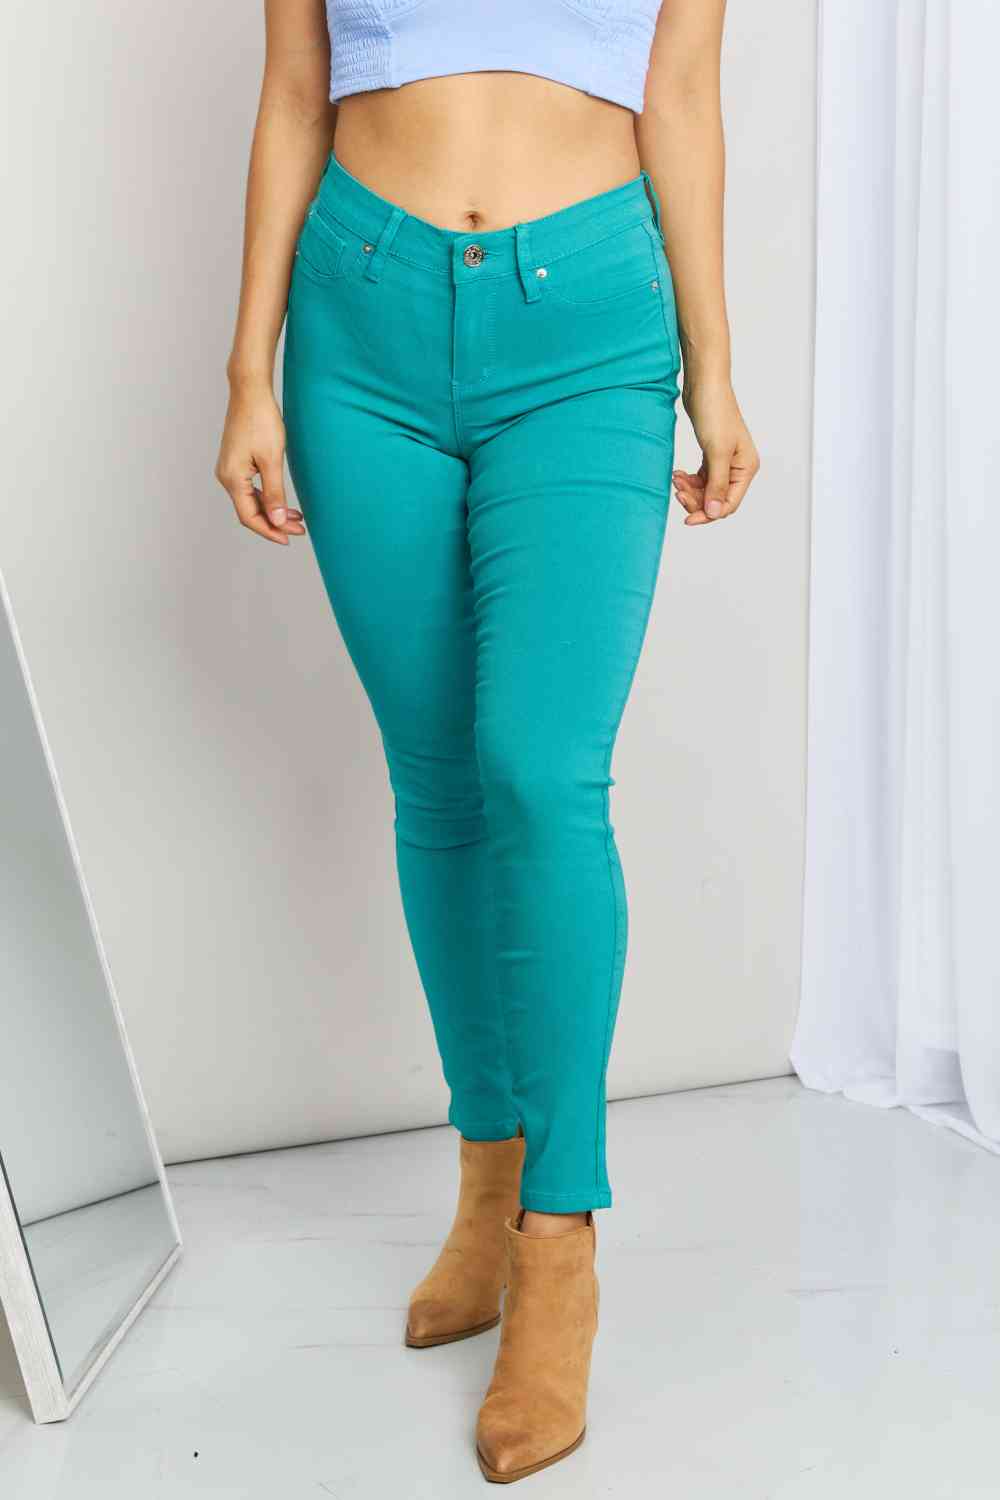 YMI Jeanswear Kate Hyper-Stretch Full Size Mid-Rise Skinny Jeans in Sea Green - AFFORDABLE MARKET